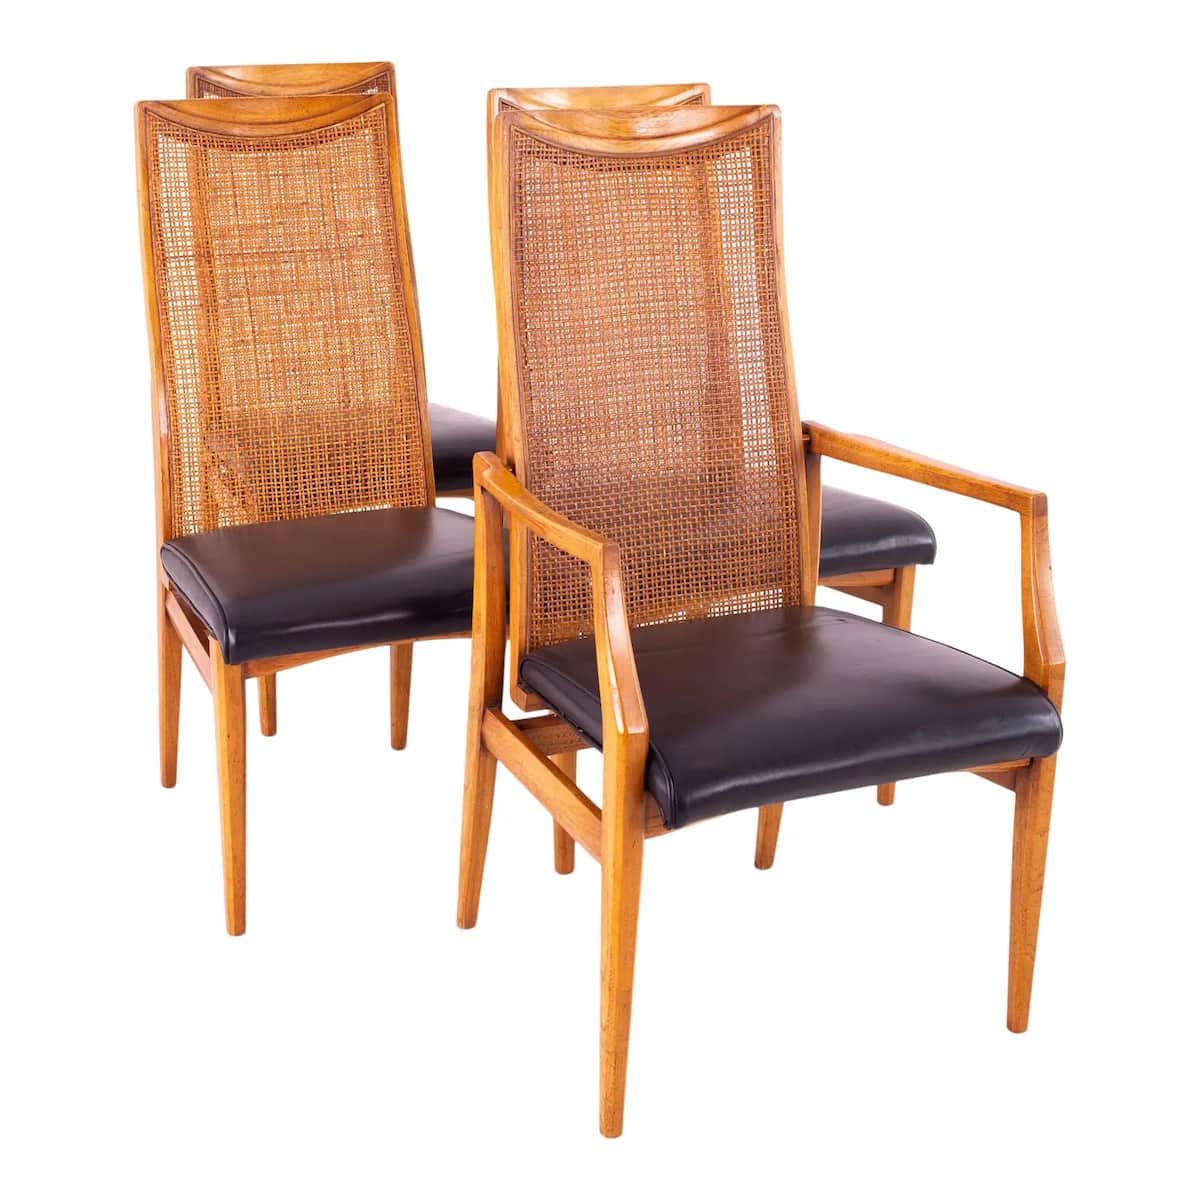 Drexel Heritage Mid Century Dining Chairs - Set of 4